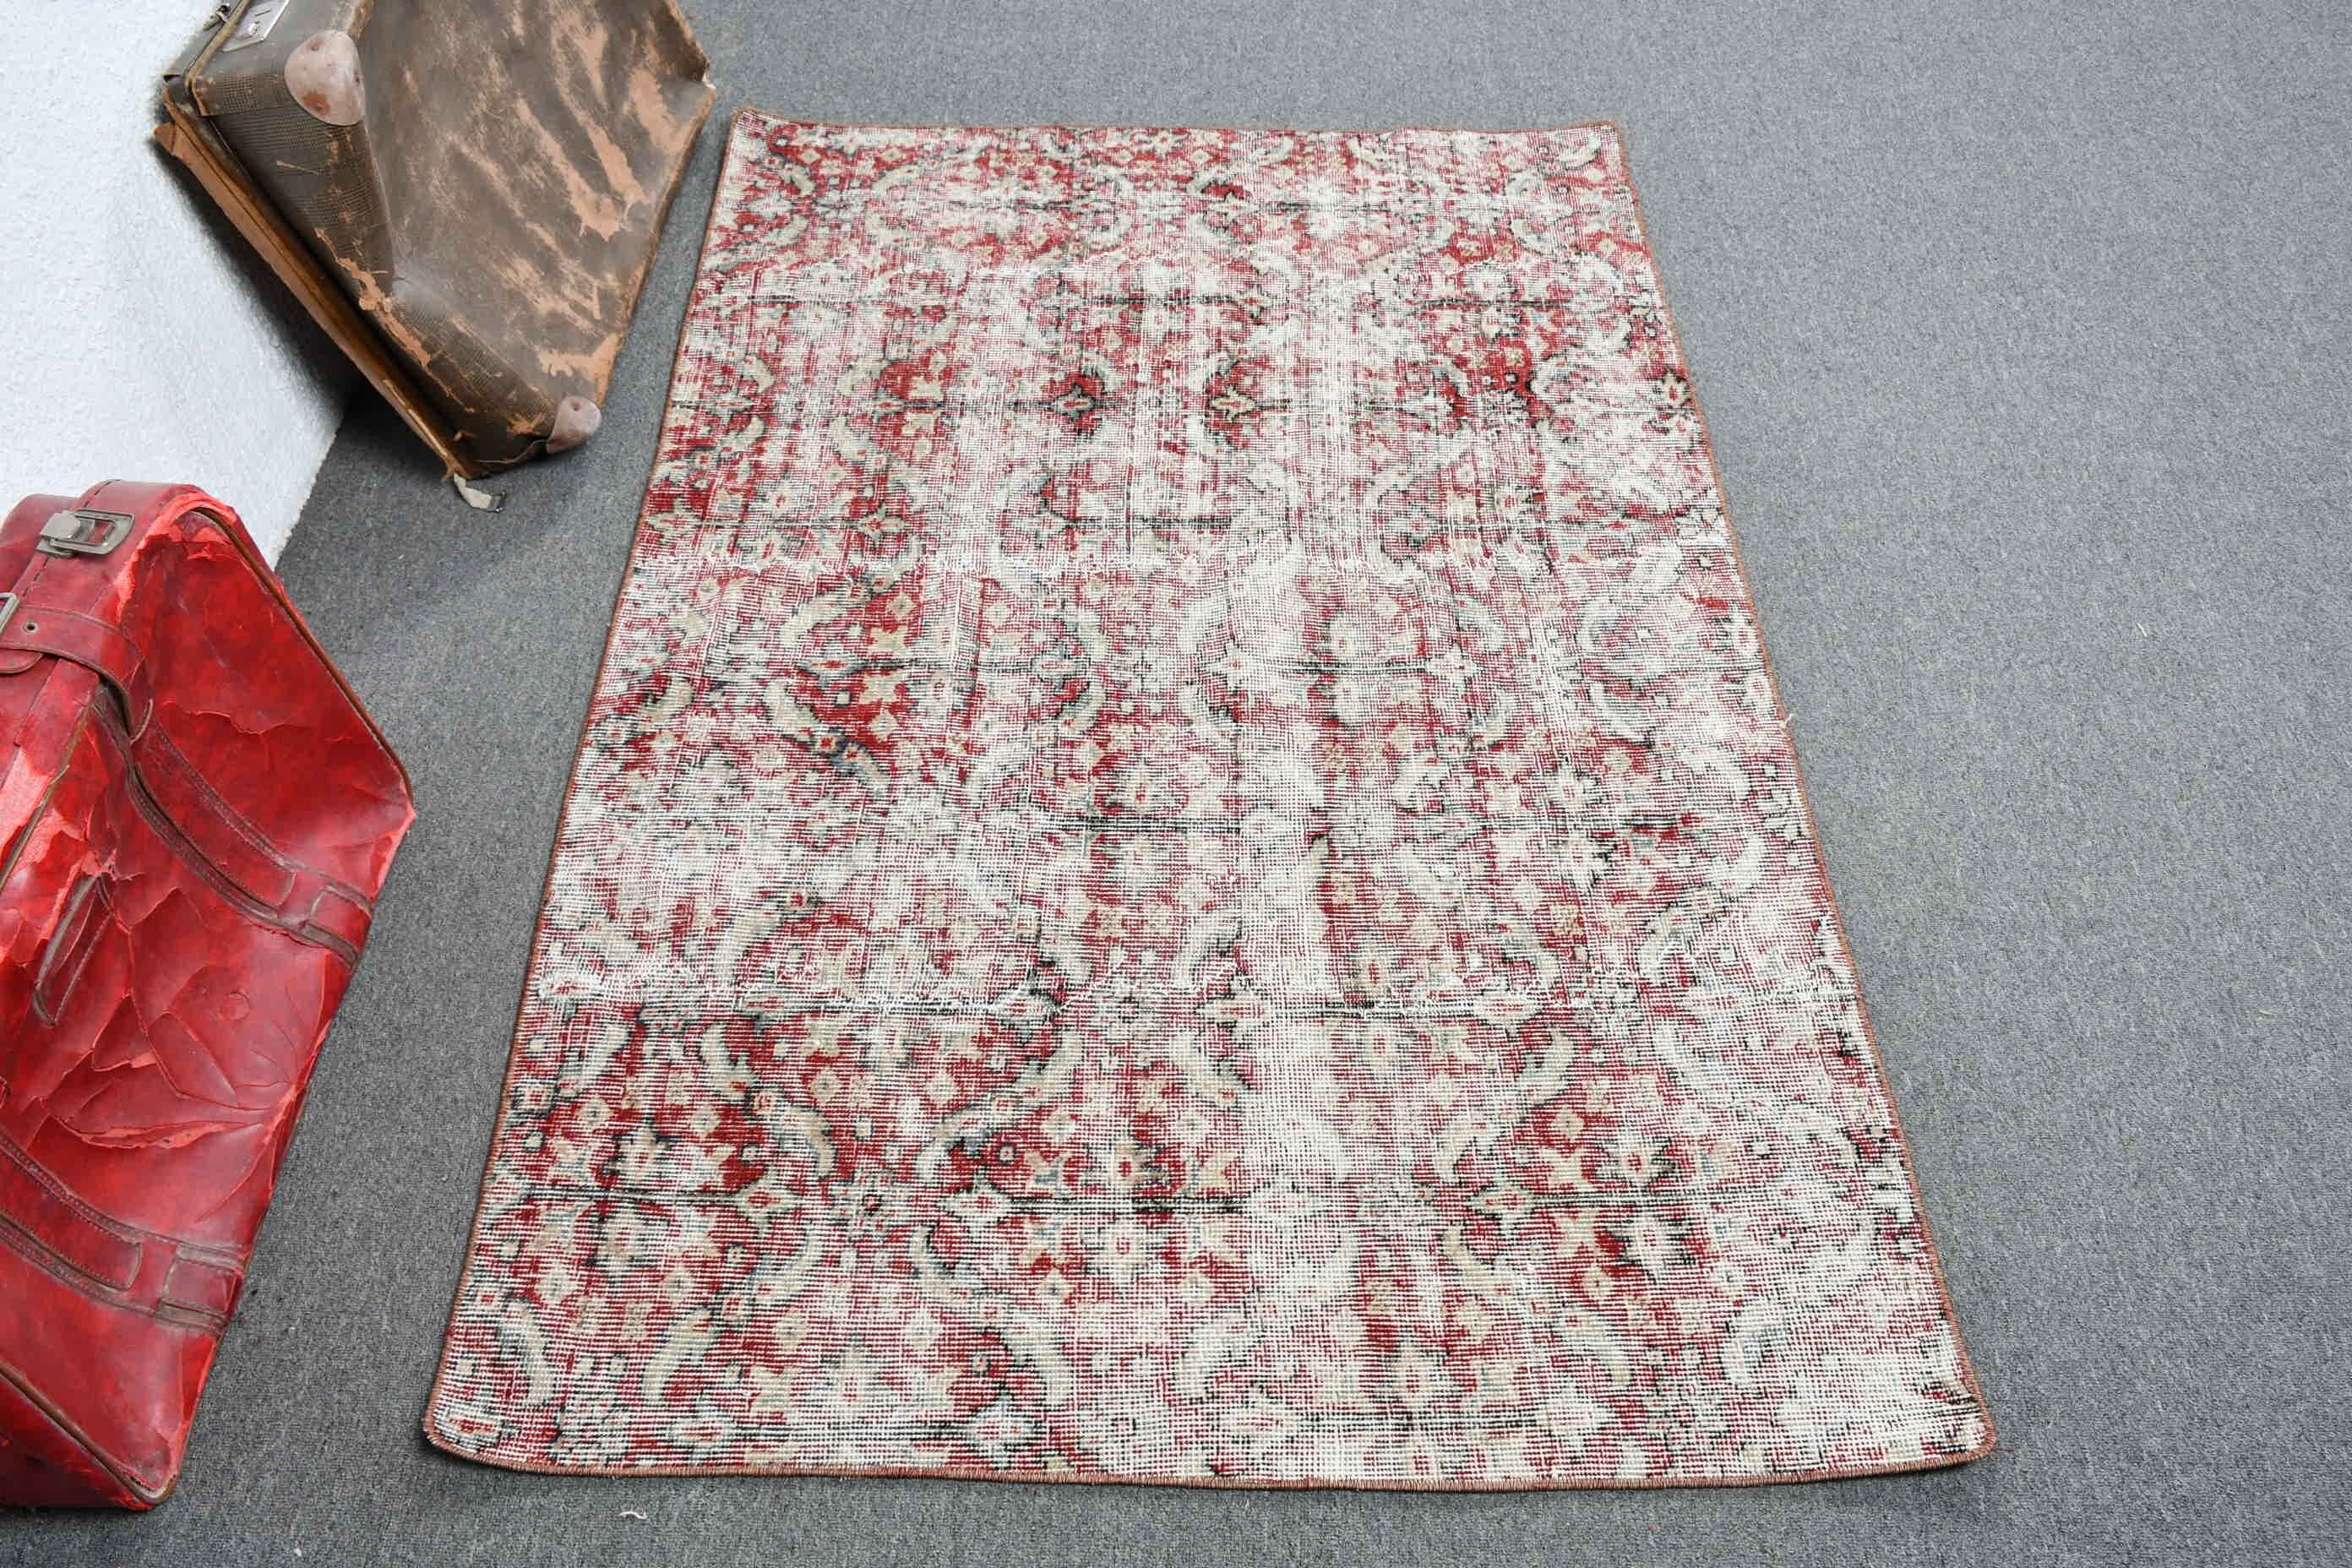 Turkish Rugs, Oushak Rugs, Moroccan Rugs, Vintage Rugs, Bedroom Rugs, Red Wool Rug, Entry Rug, Rugs for Kitchen, 3.6x5.4 ft Accent Rug